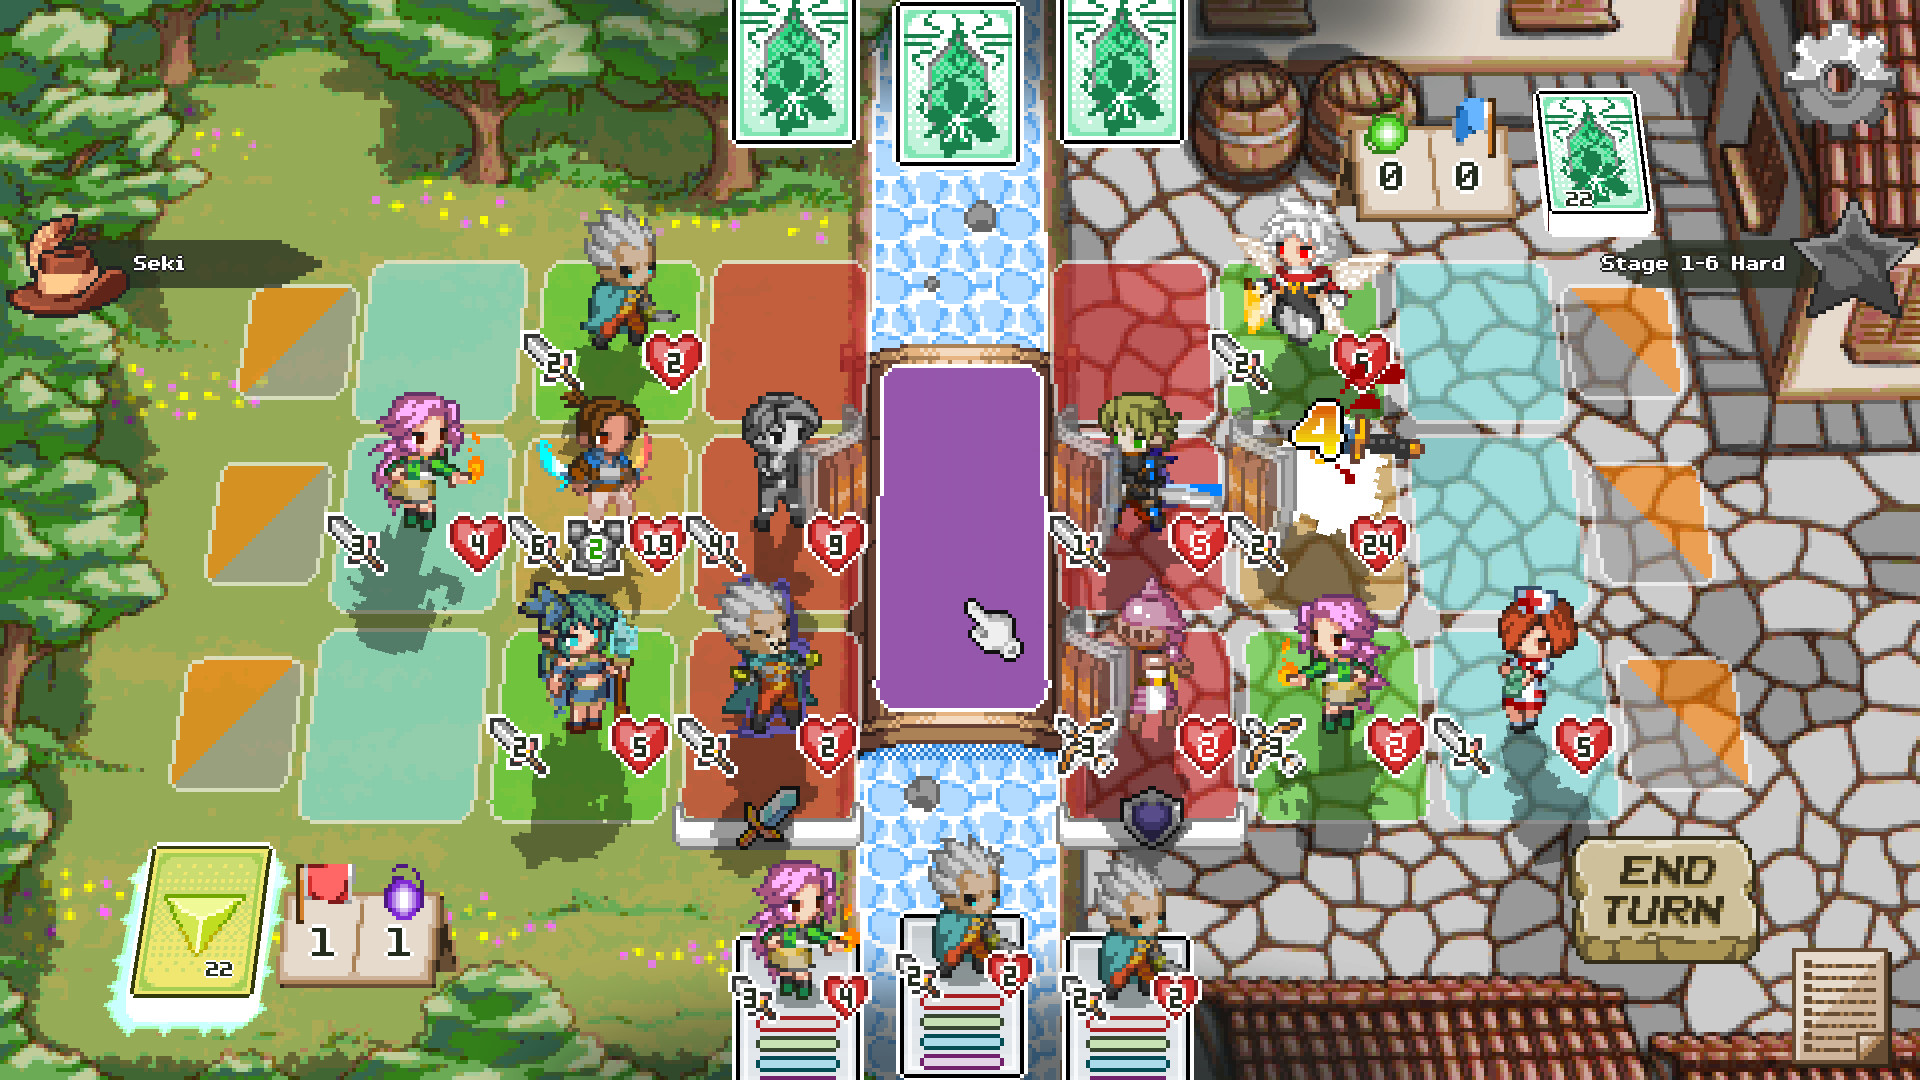  Final Fantasy-inspired card battler Pixel Tactics is coming to PC 